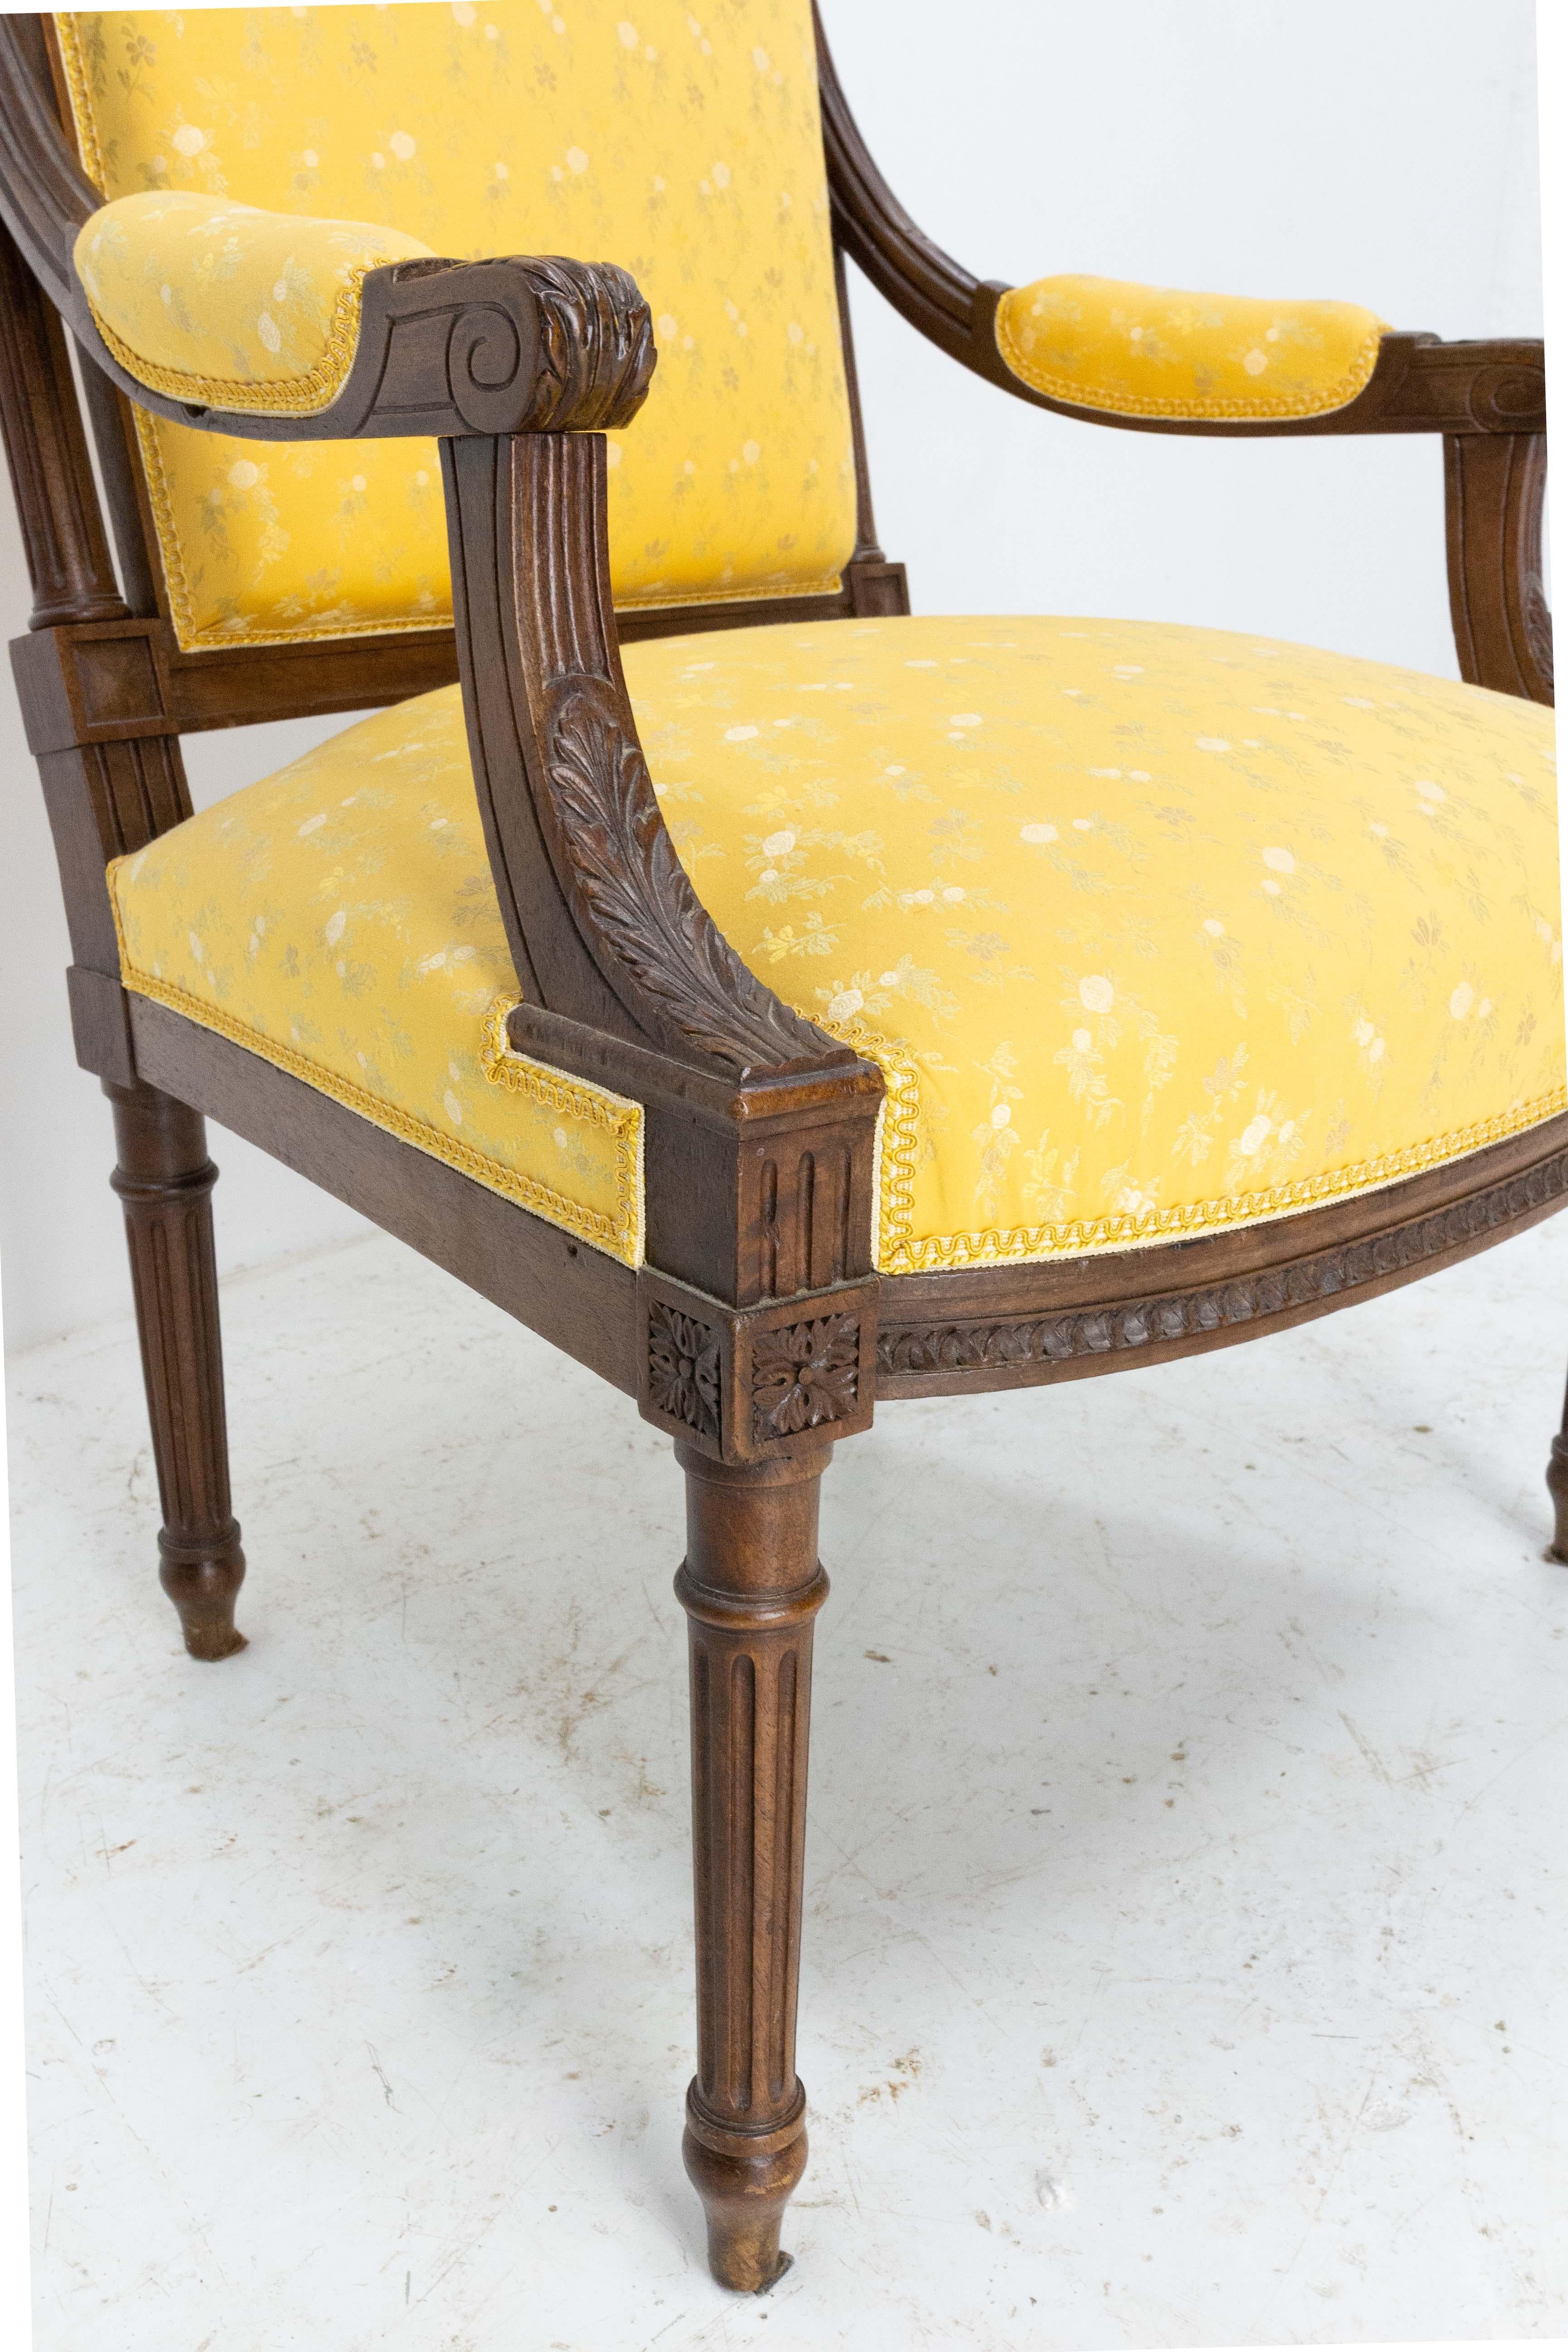 Walnut Fauteuil Louis XVI Revival Armchair French, Late 19th Century to Recover For Sale 3